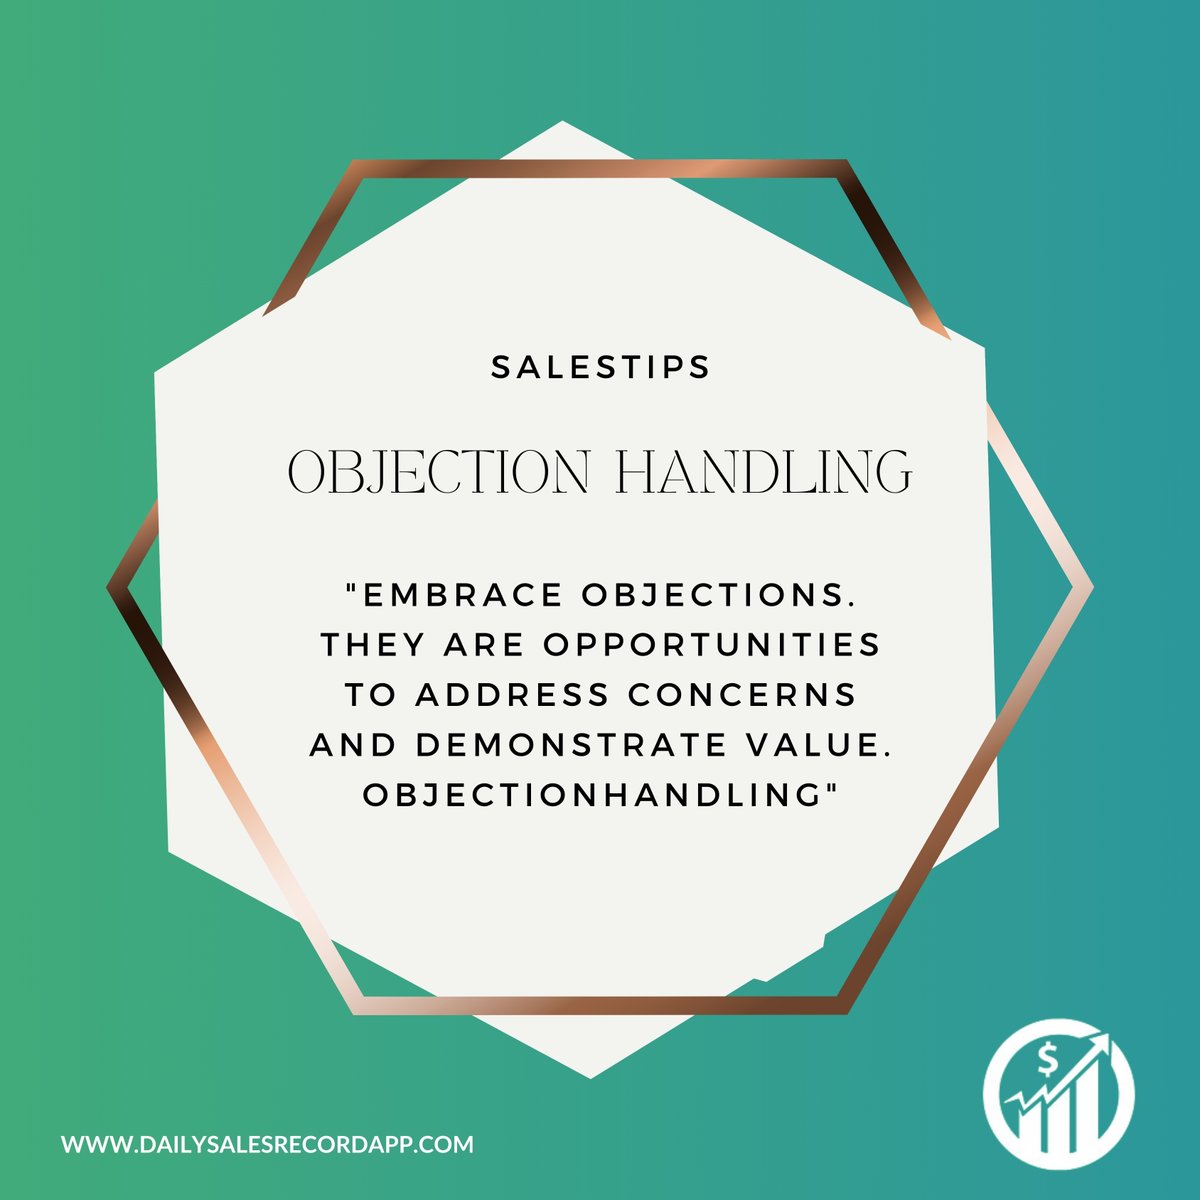 Embrace objections. They are opportunities to address concerns and demonstrate value.

#embraceobjections
#addressconcerns
#demonstratevalue
#customerfeedback
#opportunityinobjections
#valueproposition
#salesstrategy
#objectionhandling
#customerexperience
#listenandlearn